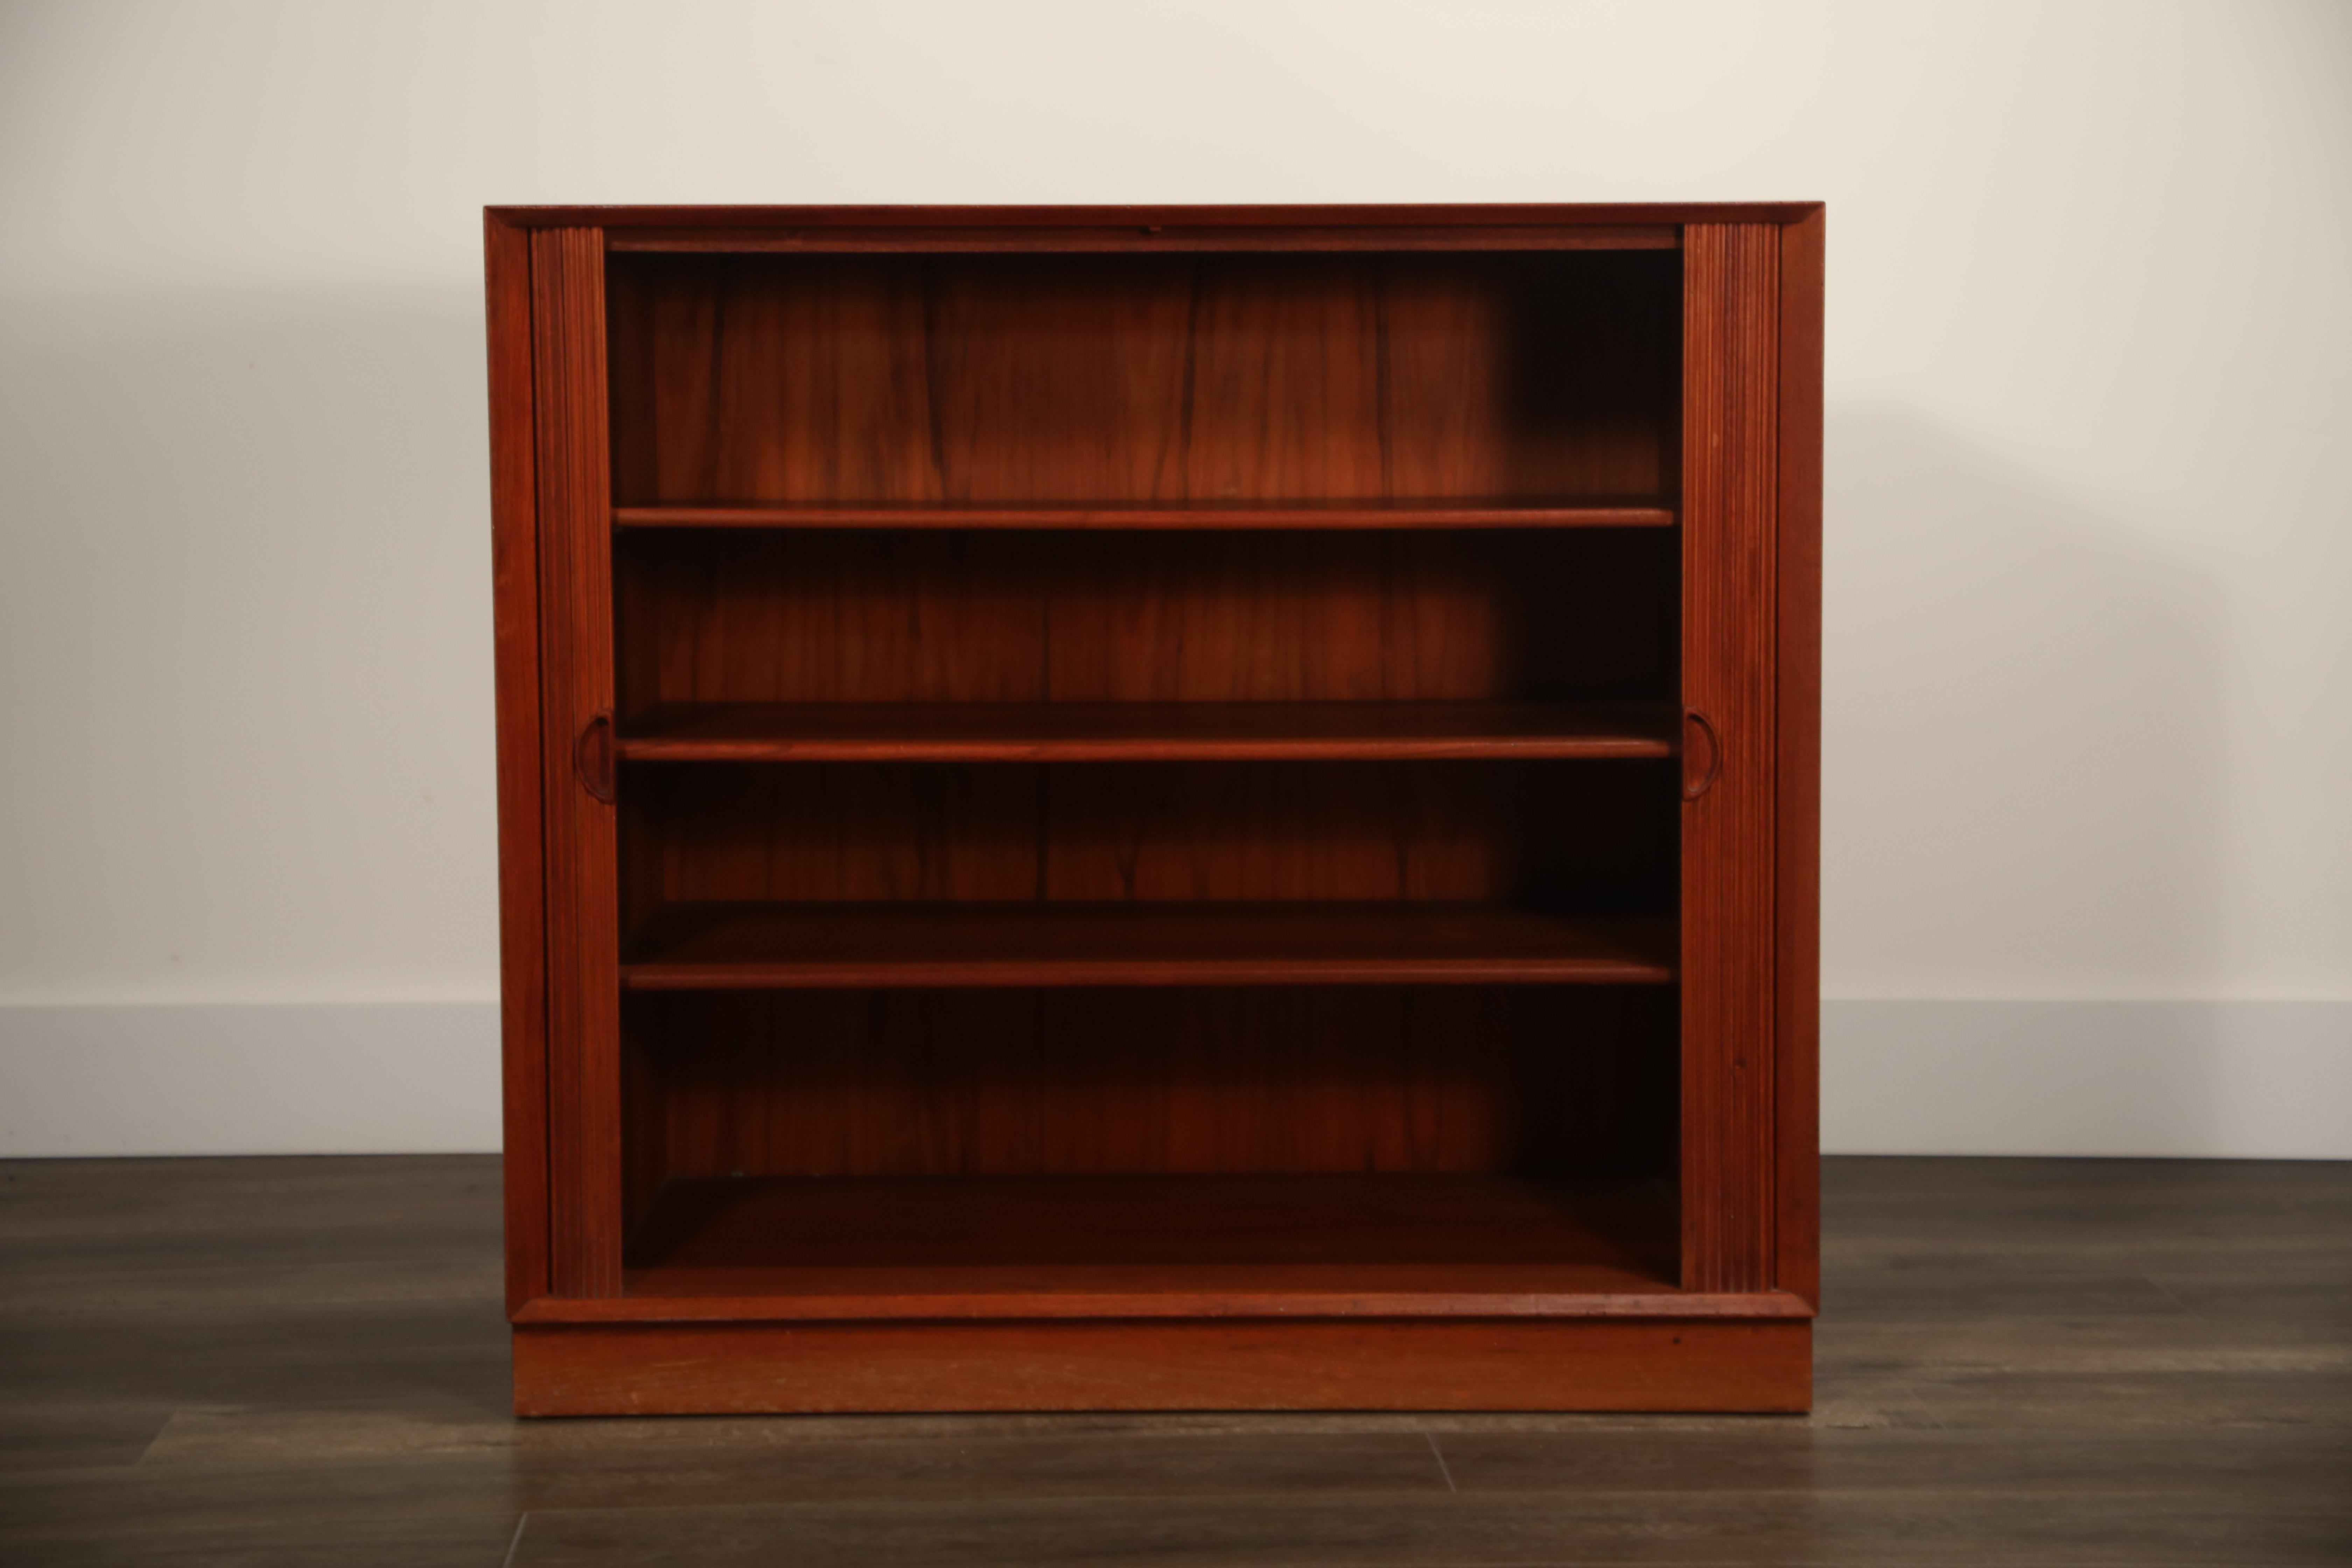 A lovely Danish modern teak cabinet with tambour front doors by Peter Hvidt & Orla Mølgaard Nielsen for Illums Bolighus. This charming chest features three interior adjustable shelves, high quality joinery and incredible teak grain and color. In